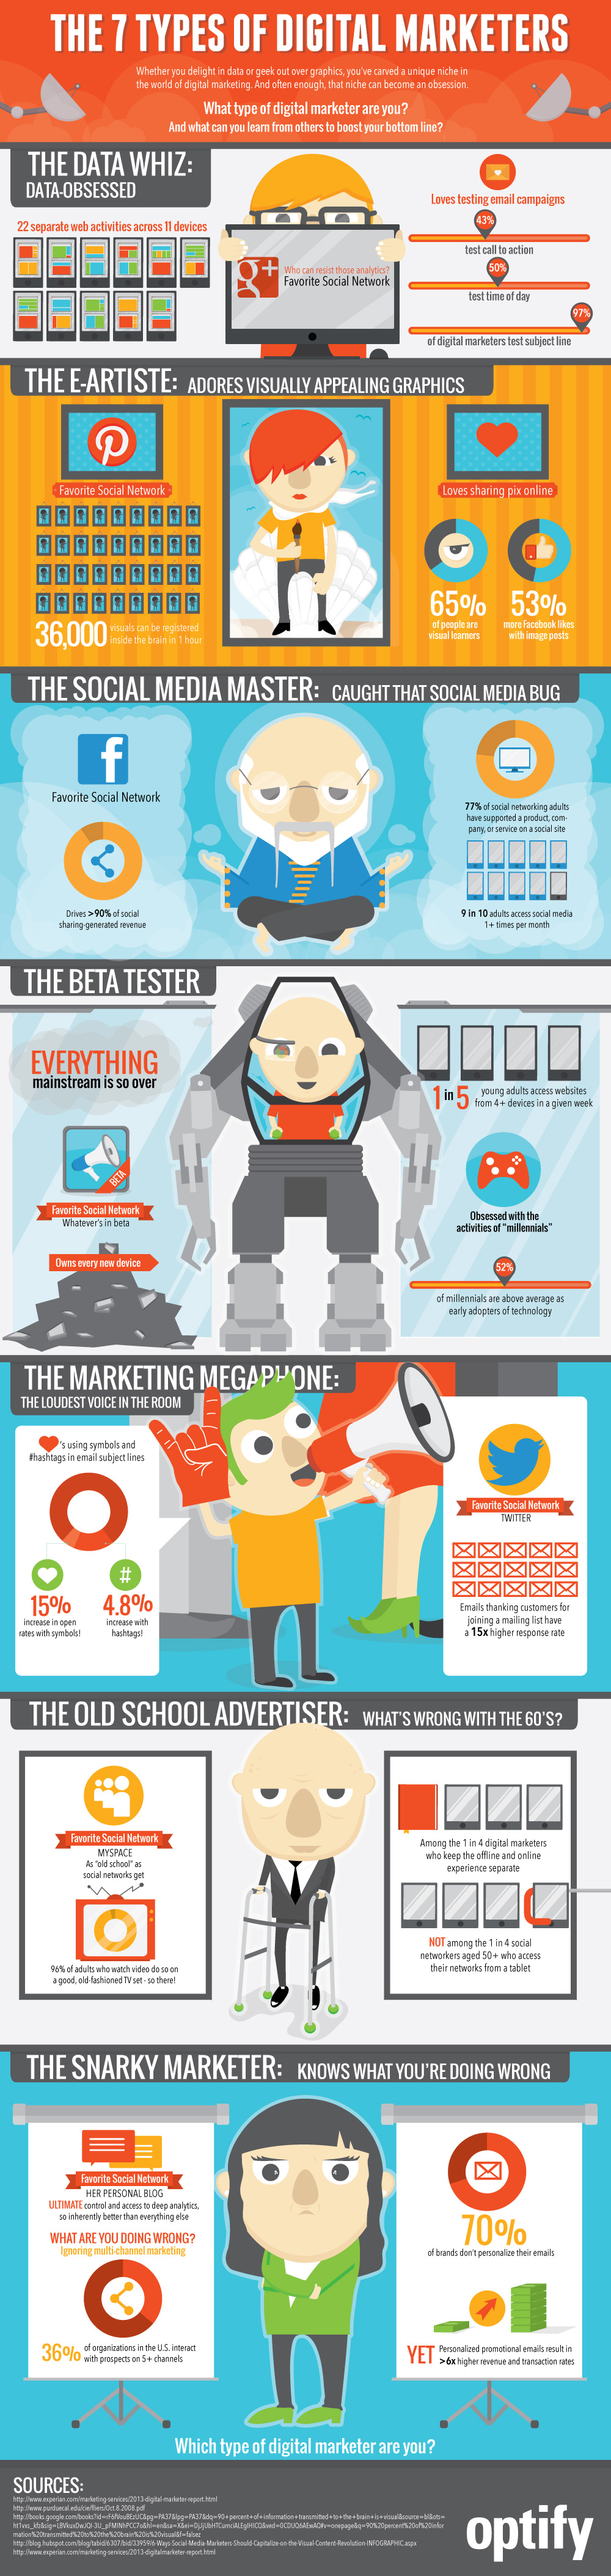 7-kinds-of-digital-marketers-infographic